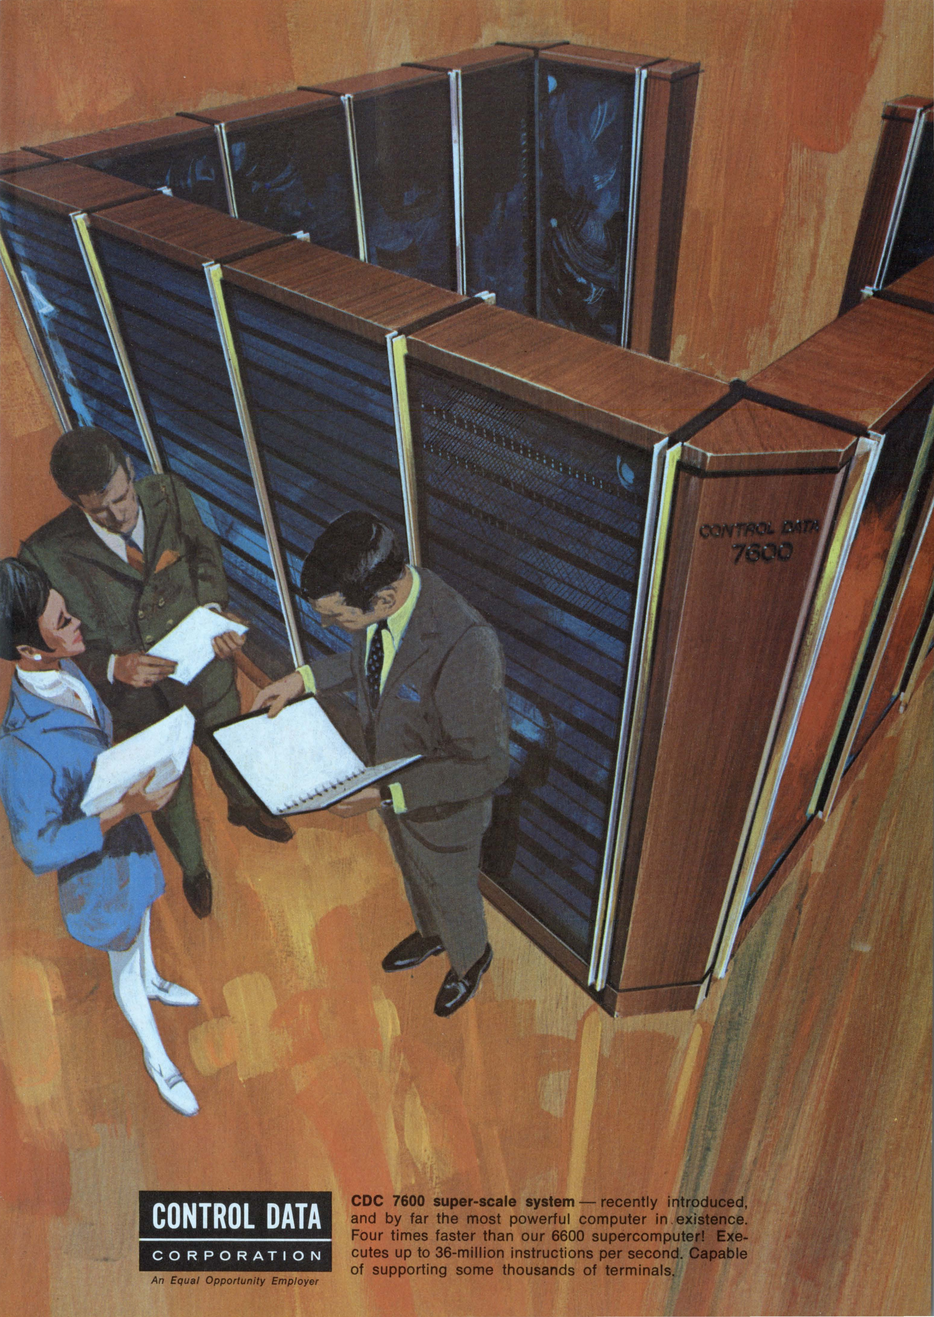 Illustration from the article “Advertisement for the CDC 7600” in Software Age (February 1969)